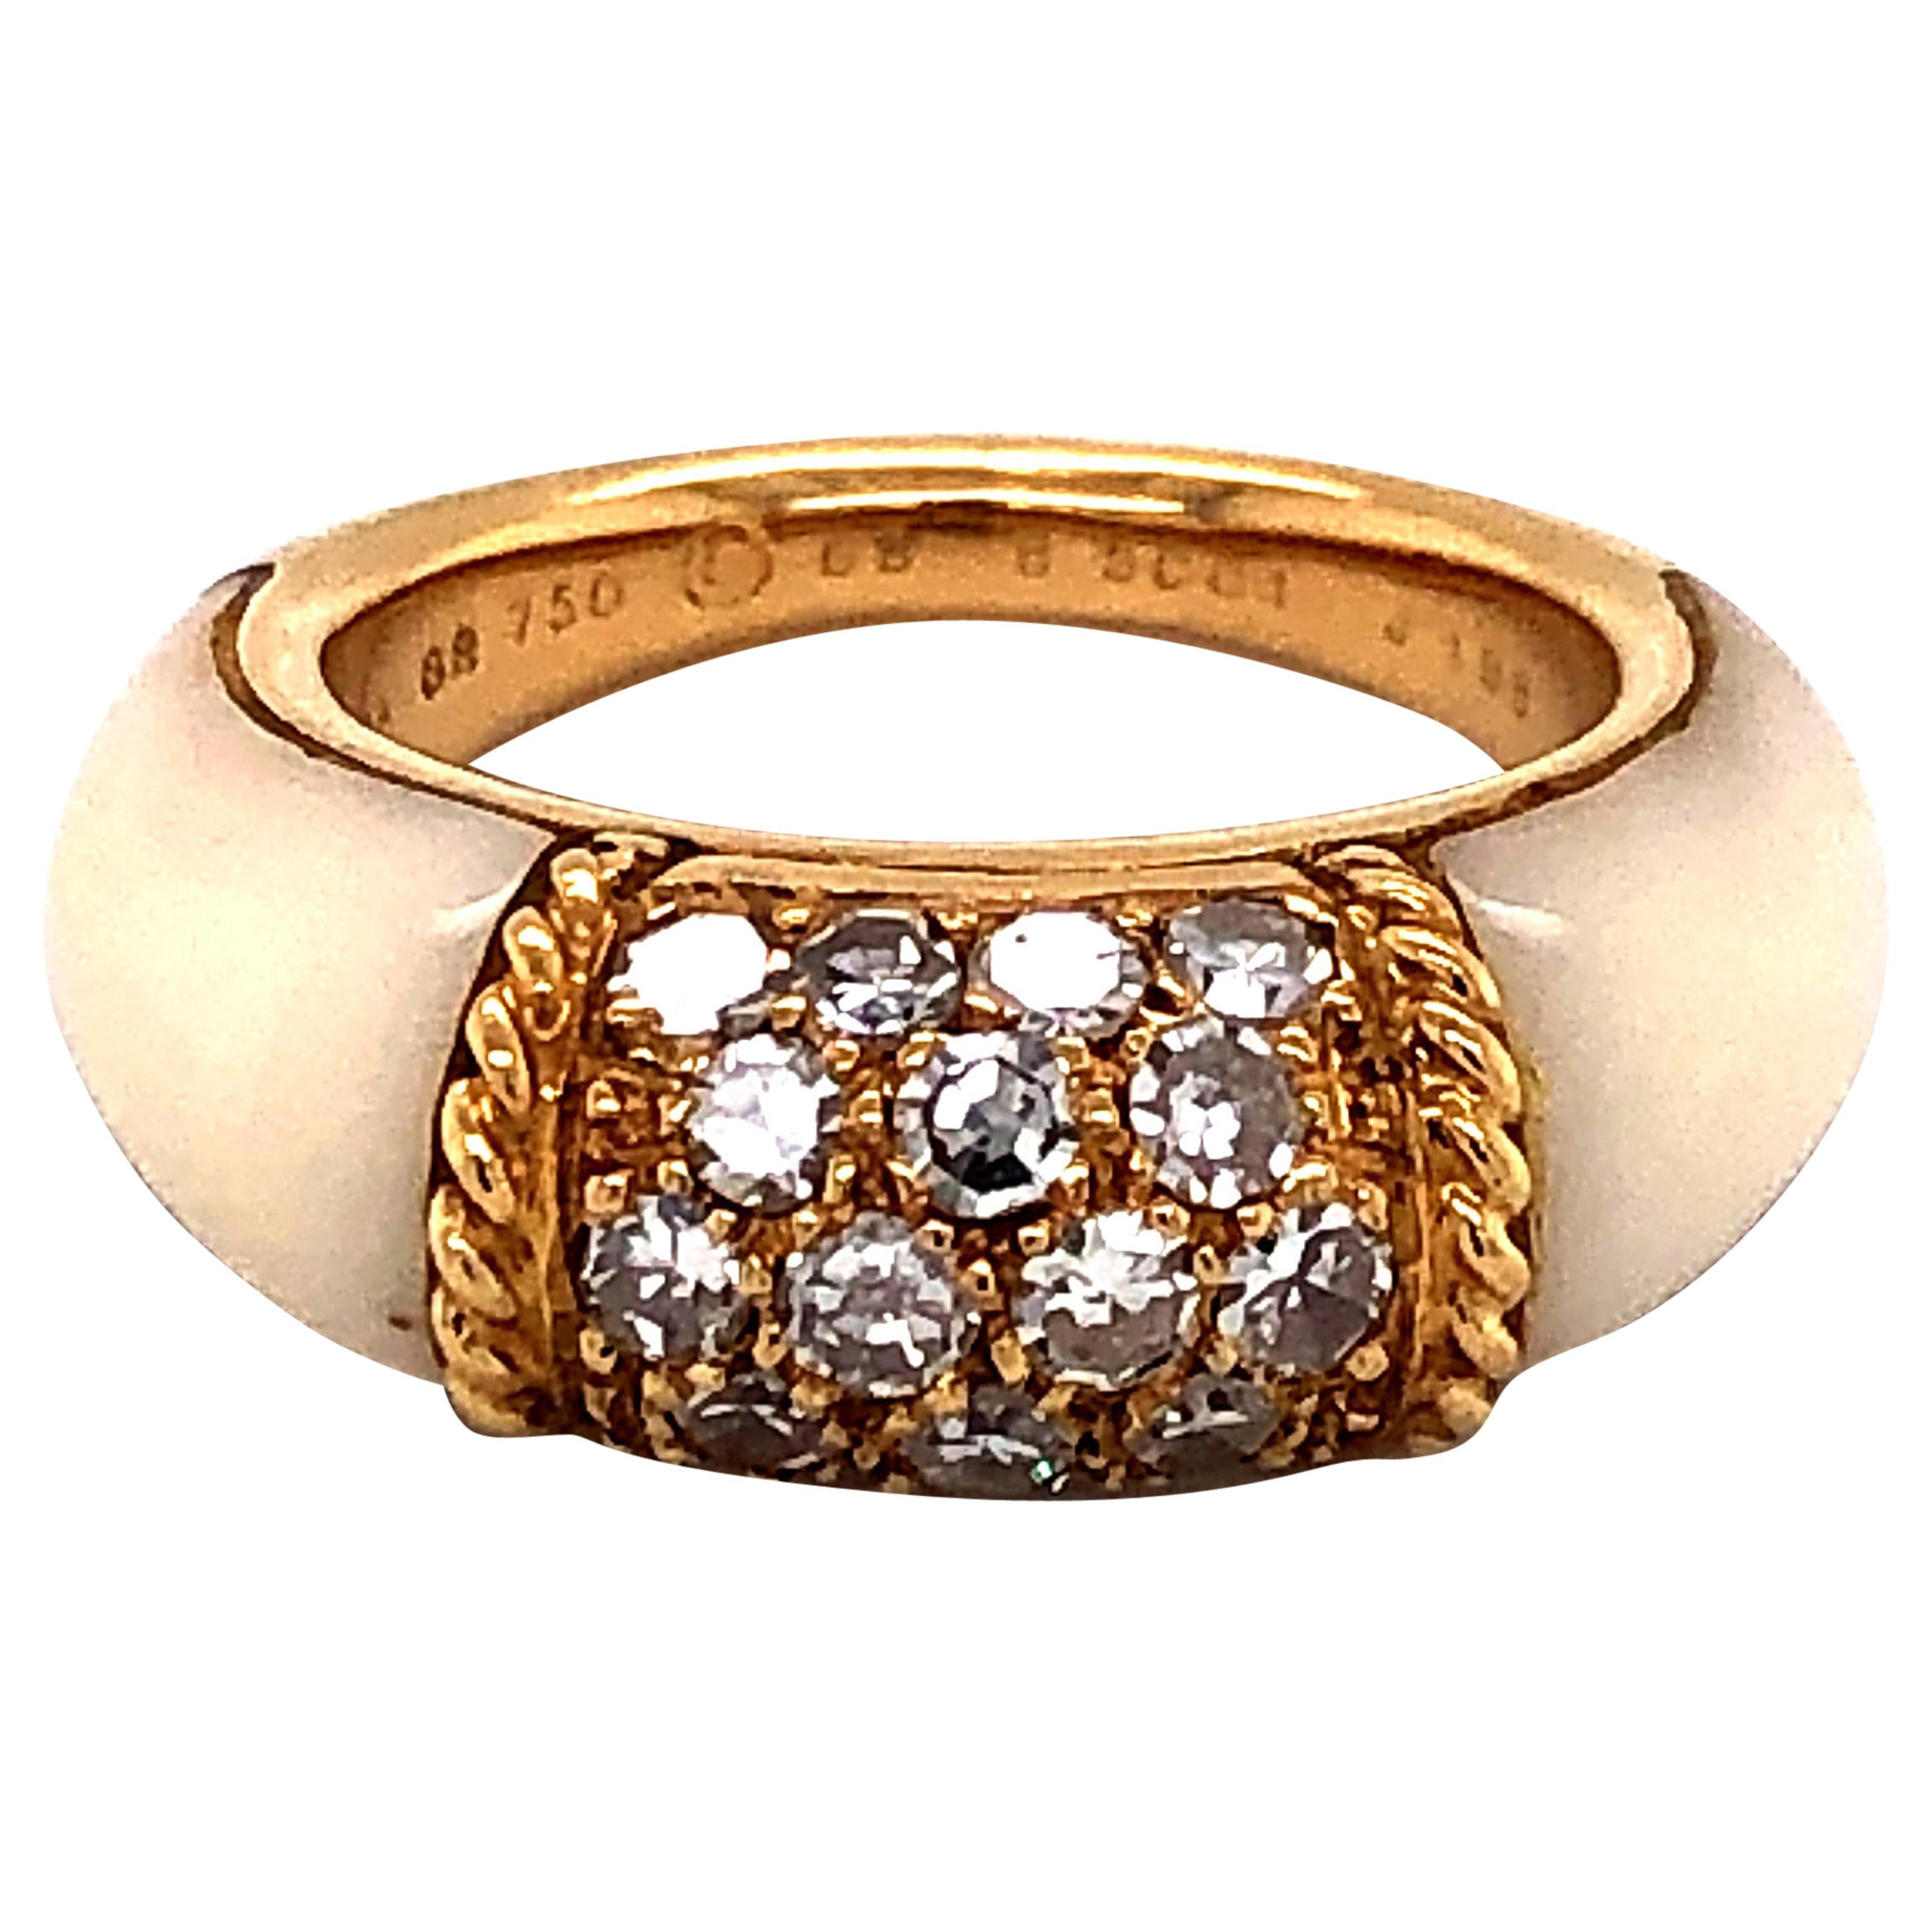 Van Cleef & Arpels Stacking Philippine Ring, Diamonds, White Coral, Yellow Gold